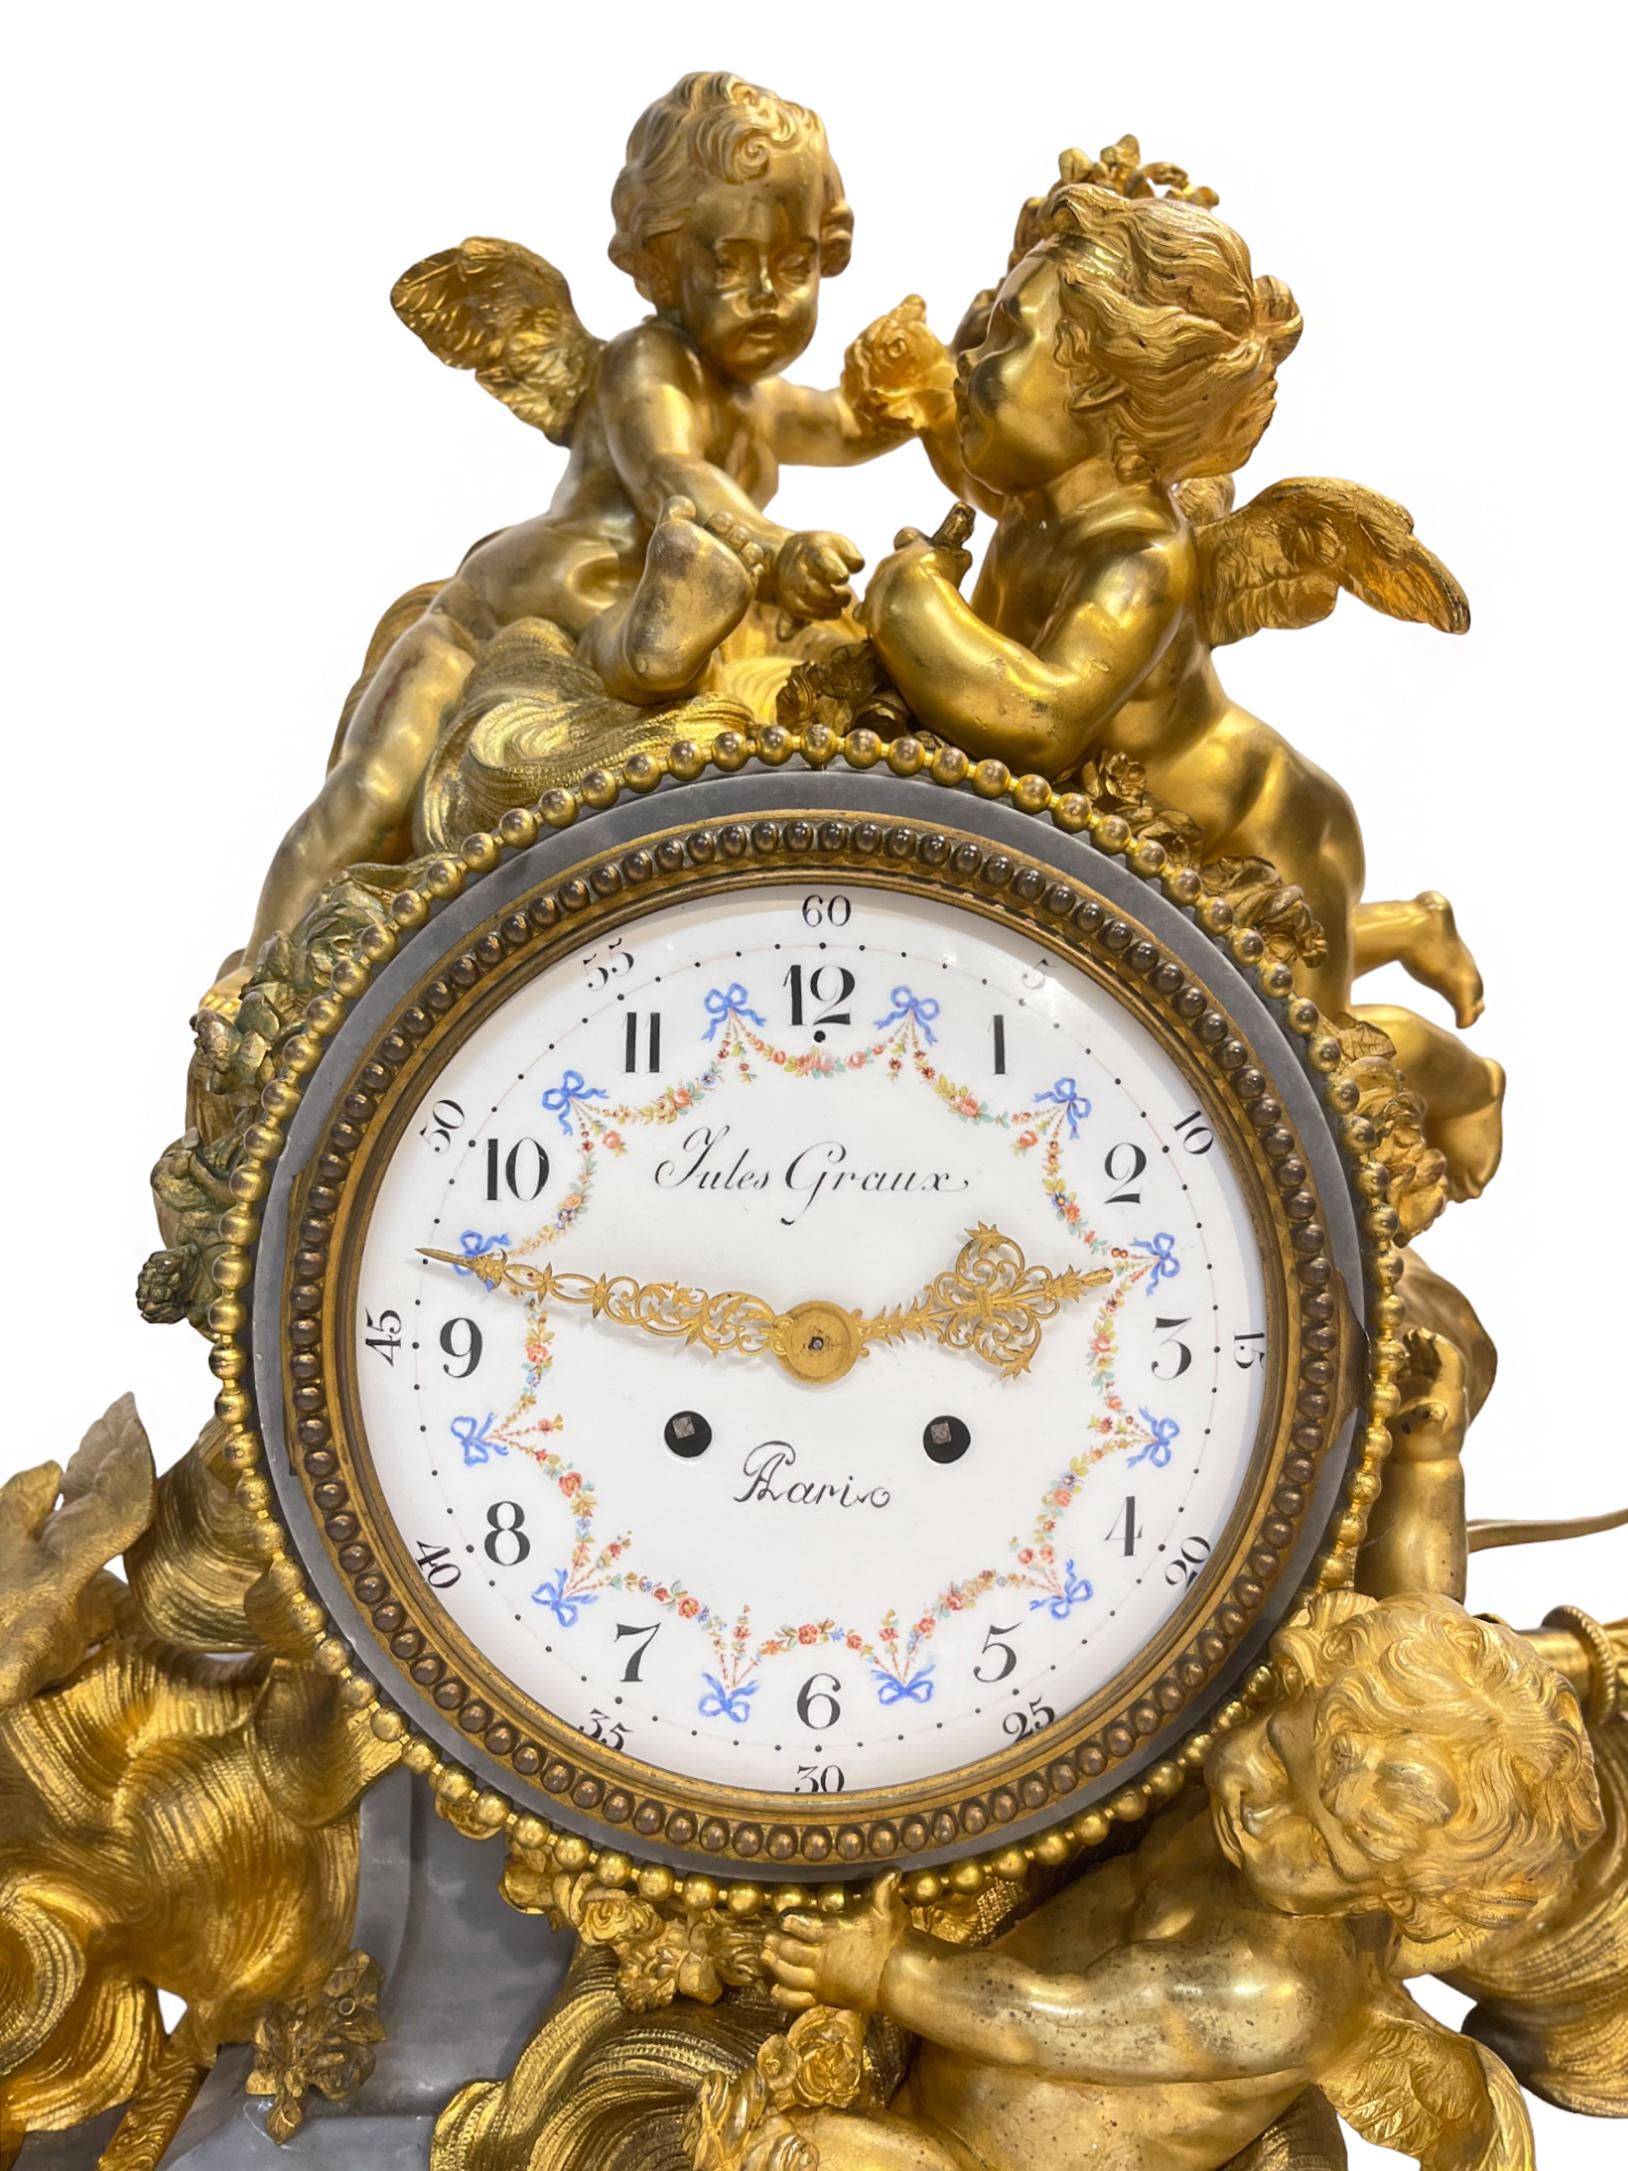 A fine Louis XVI-style large gilt-bronze and greige Rococo marble figural mantel clock is surmounted by three dore bronze putti figures hanging floral adornments among clouds with love birds and Cupid's bow. Raised on bronze feet with ormolu